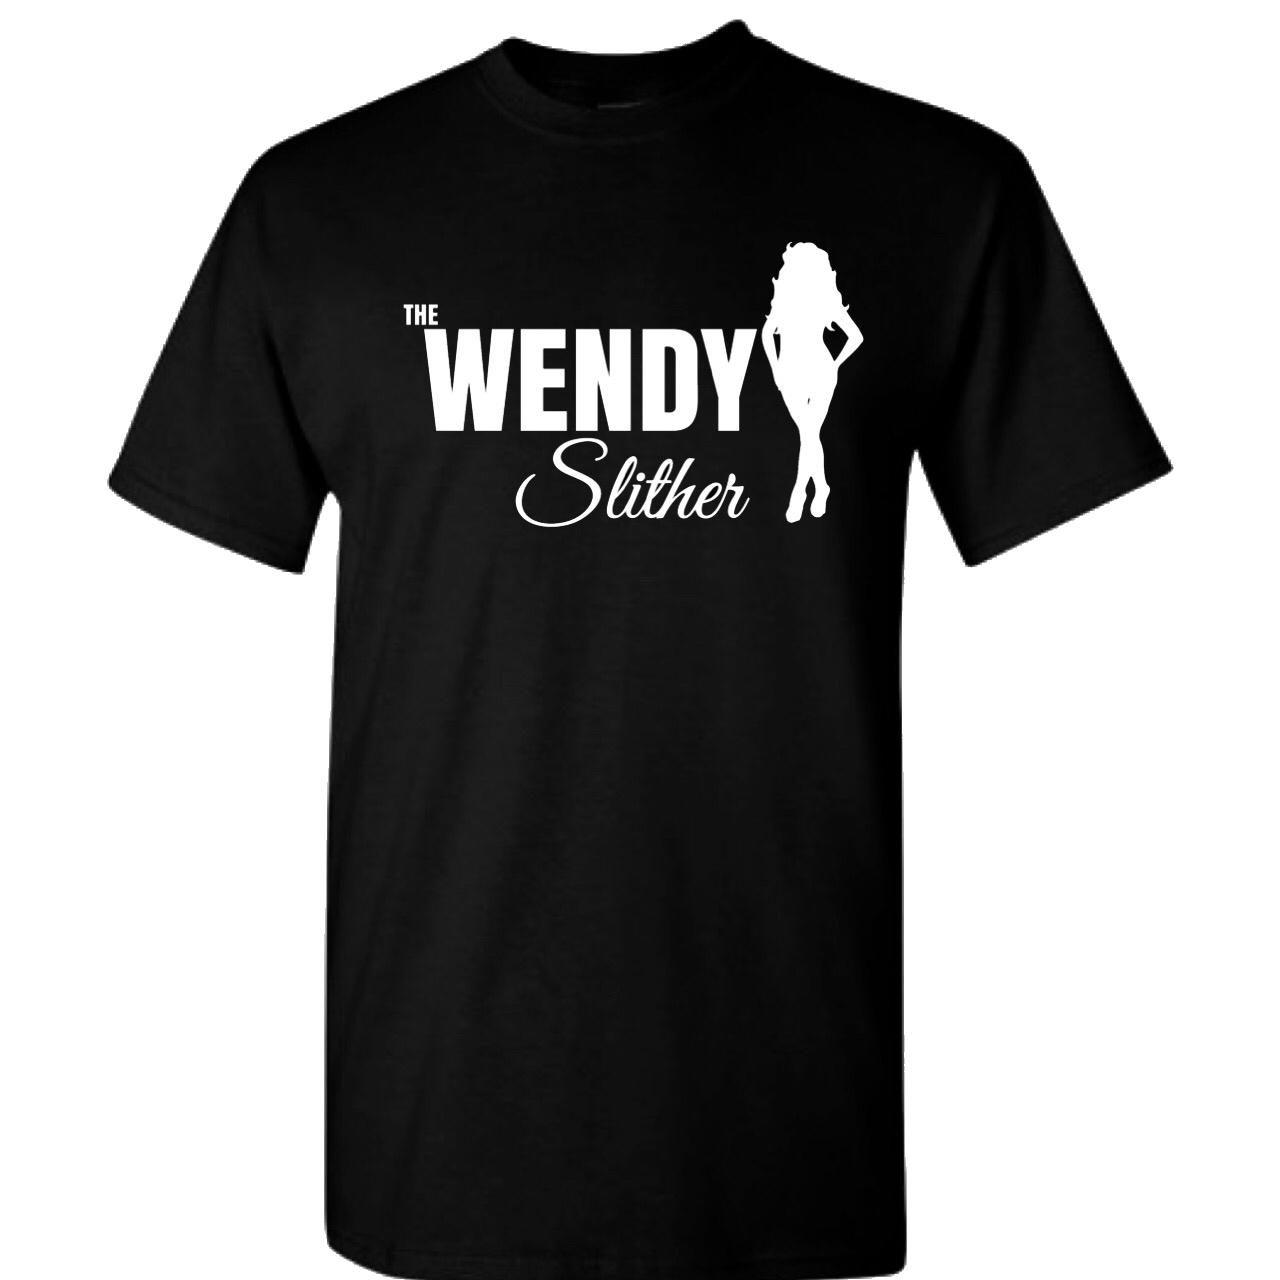 The Wendy Slither T-Shirt – Black